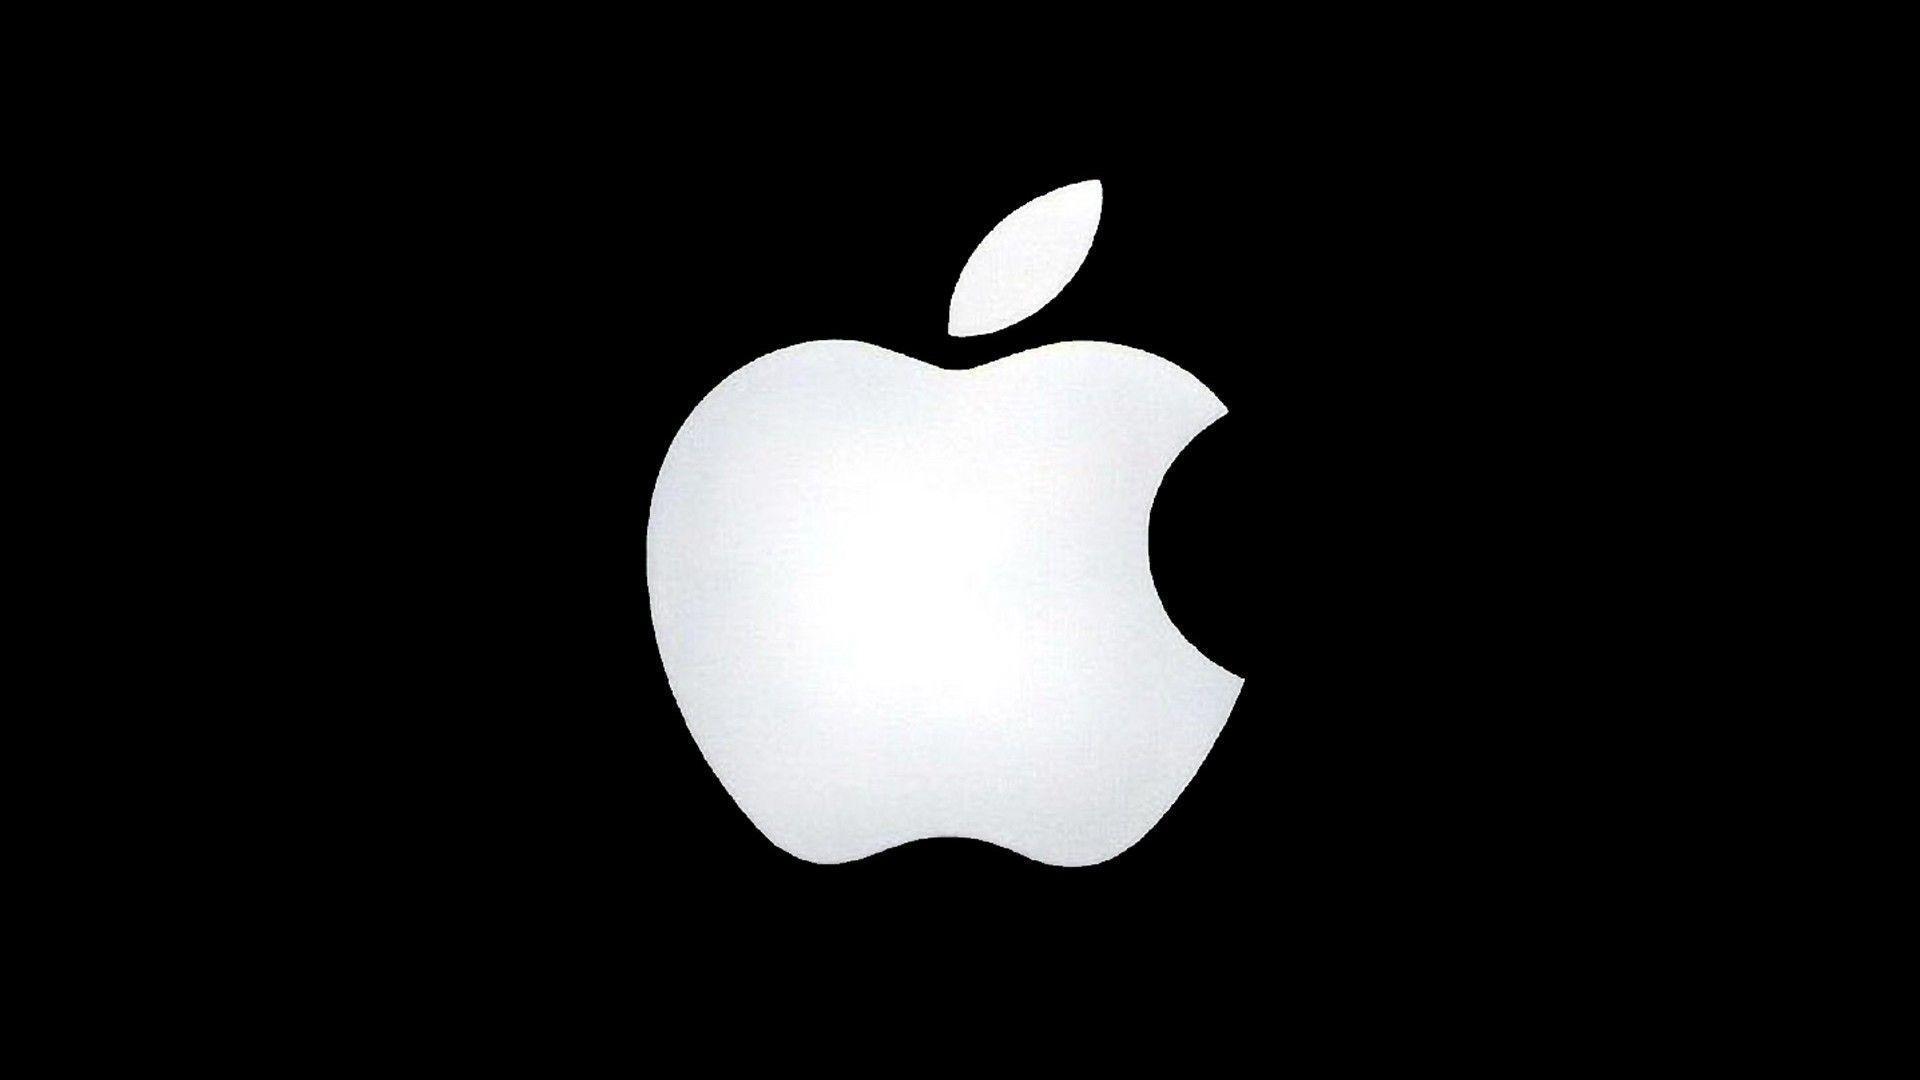 Black And White Apple Wallpapers - Wallpaper Cave